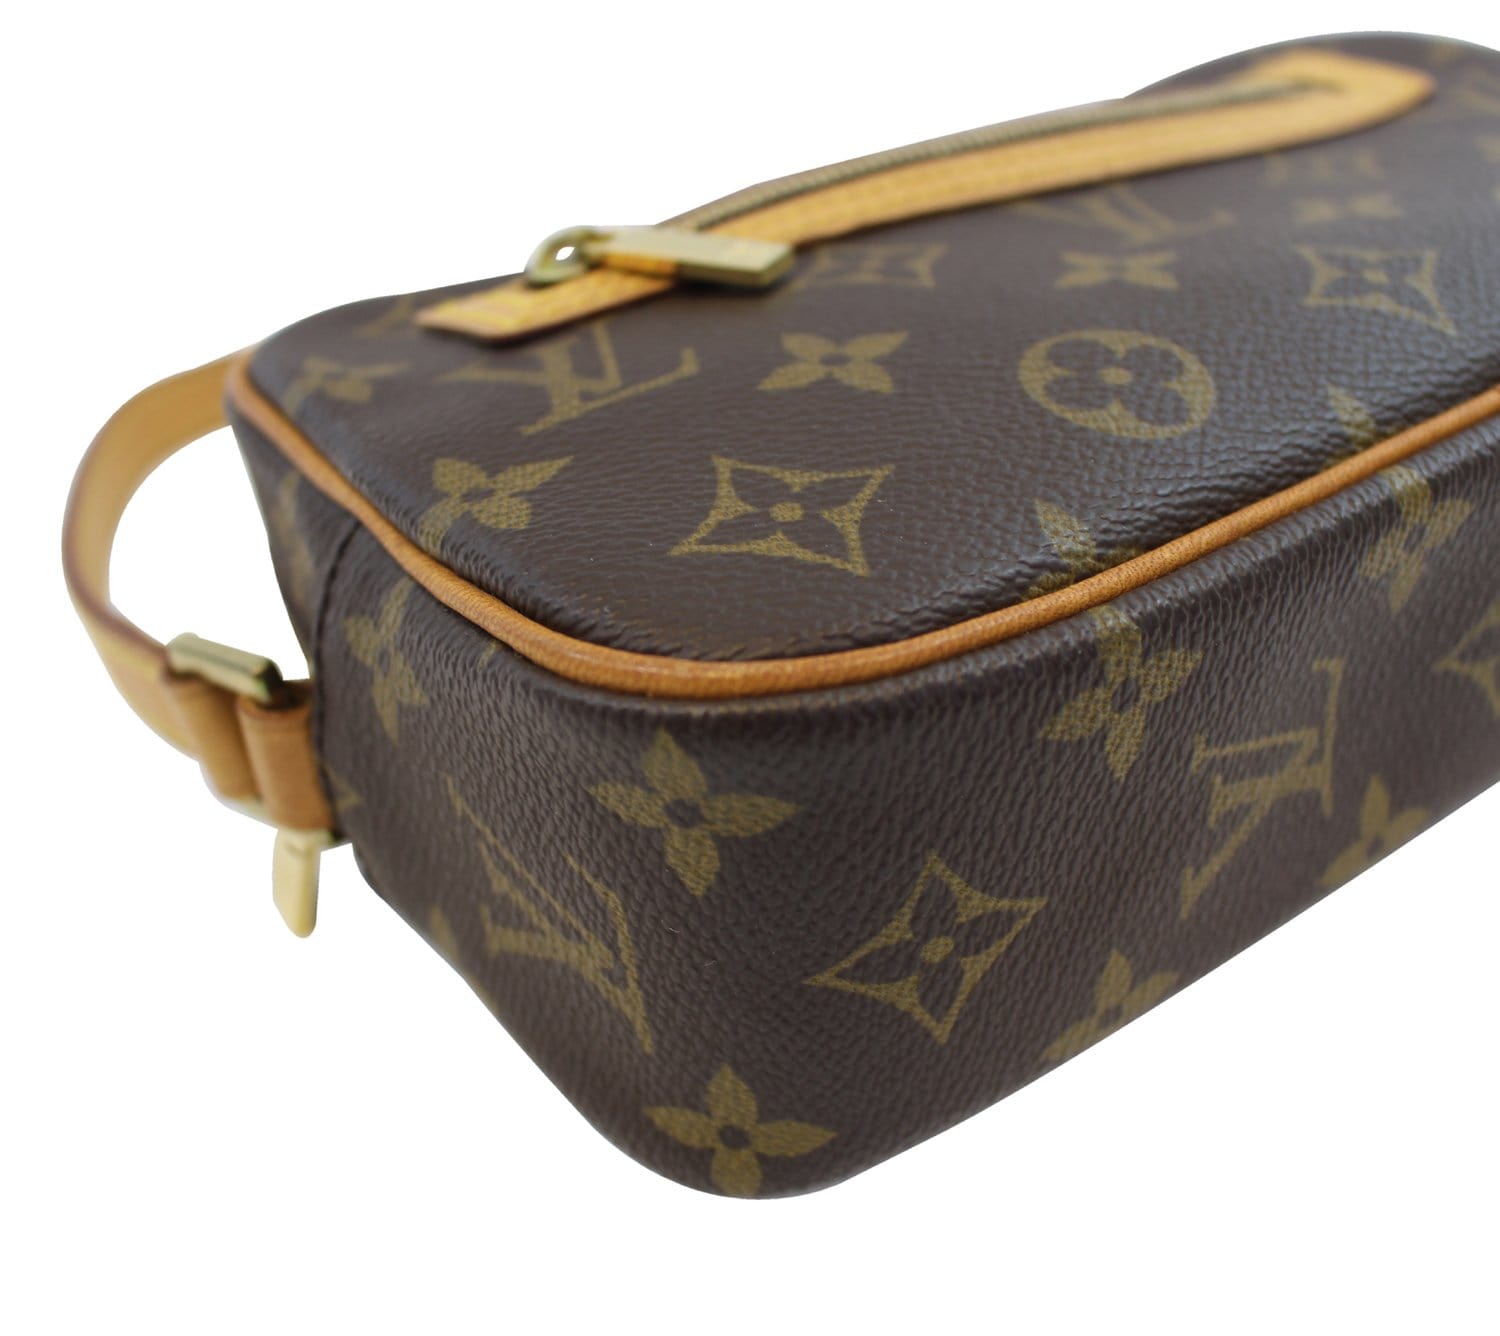 Louis vuitton pochette cite, Gallery posted by no.cc_988